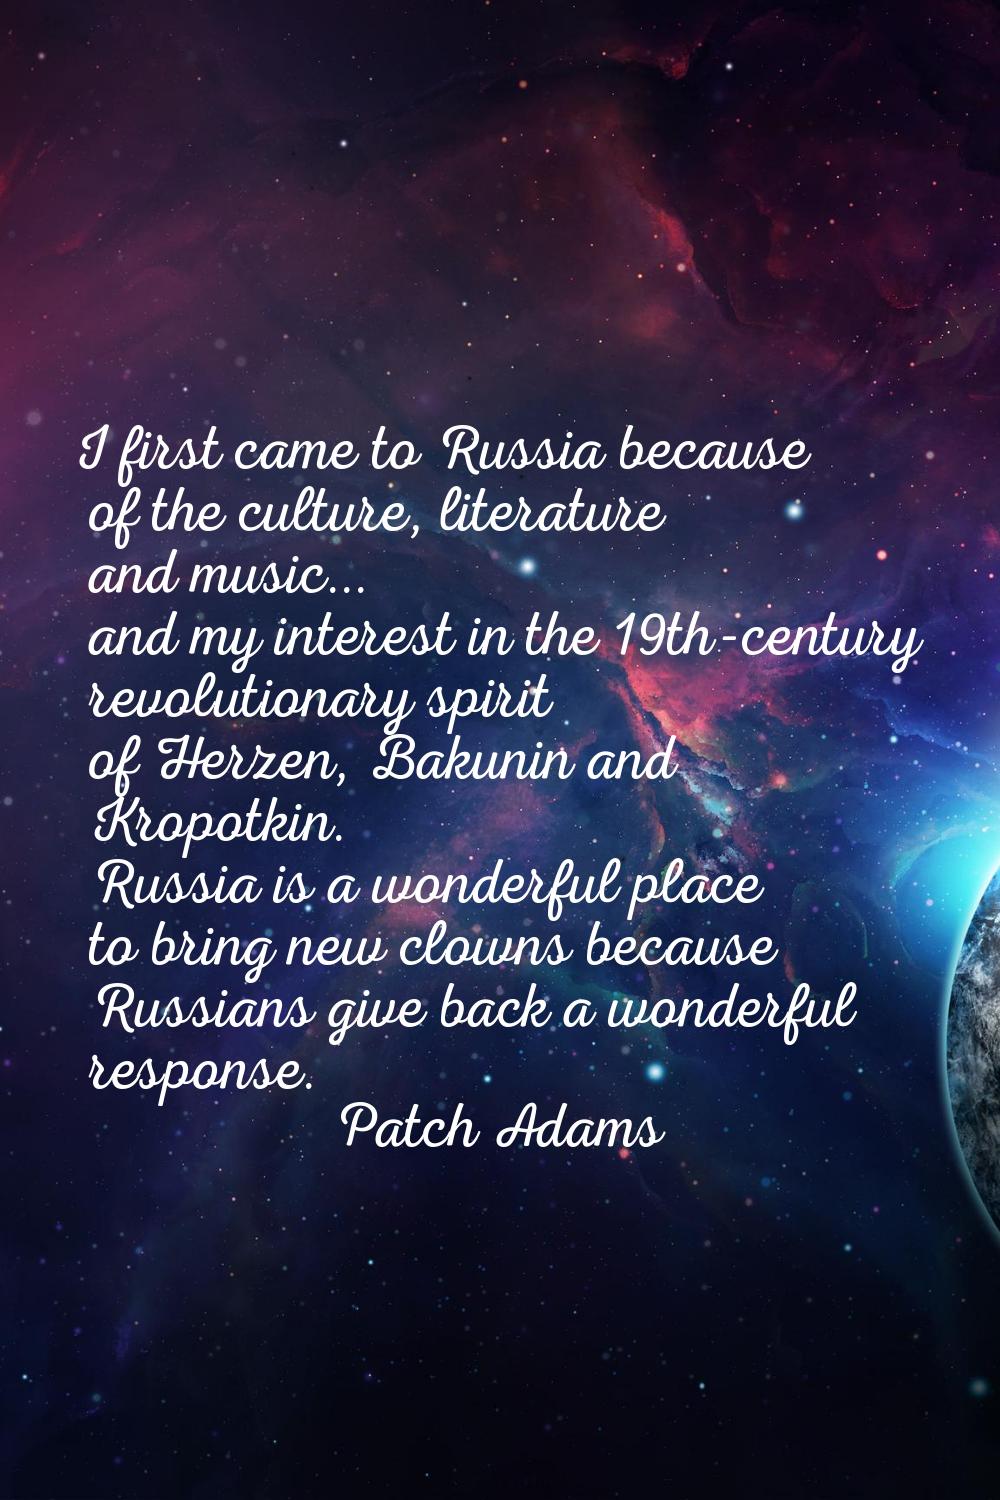 I first came to Russia because of the culture, literature and music... and my interest in the 19th-